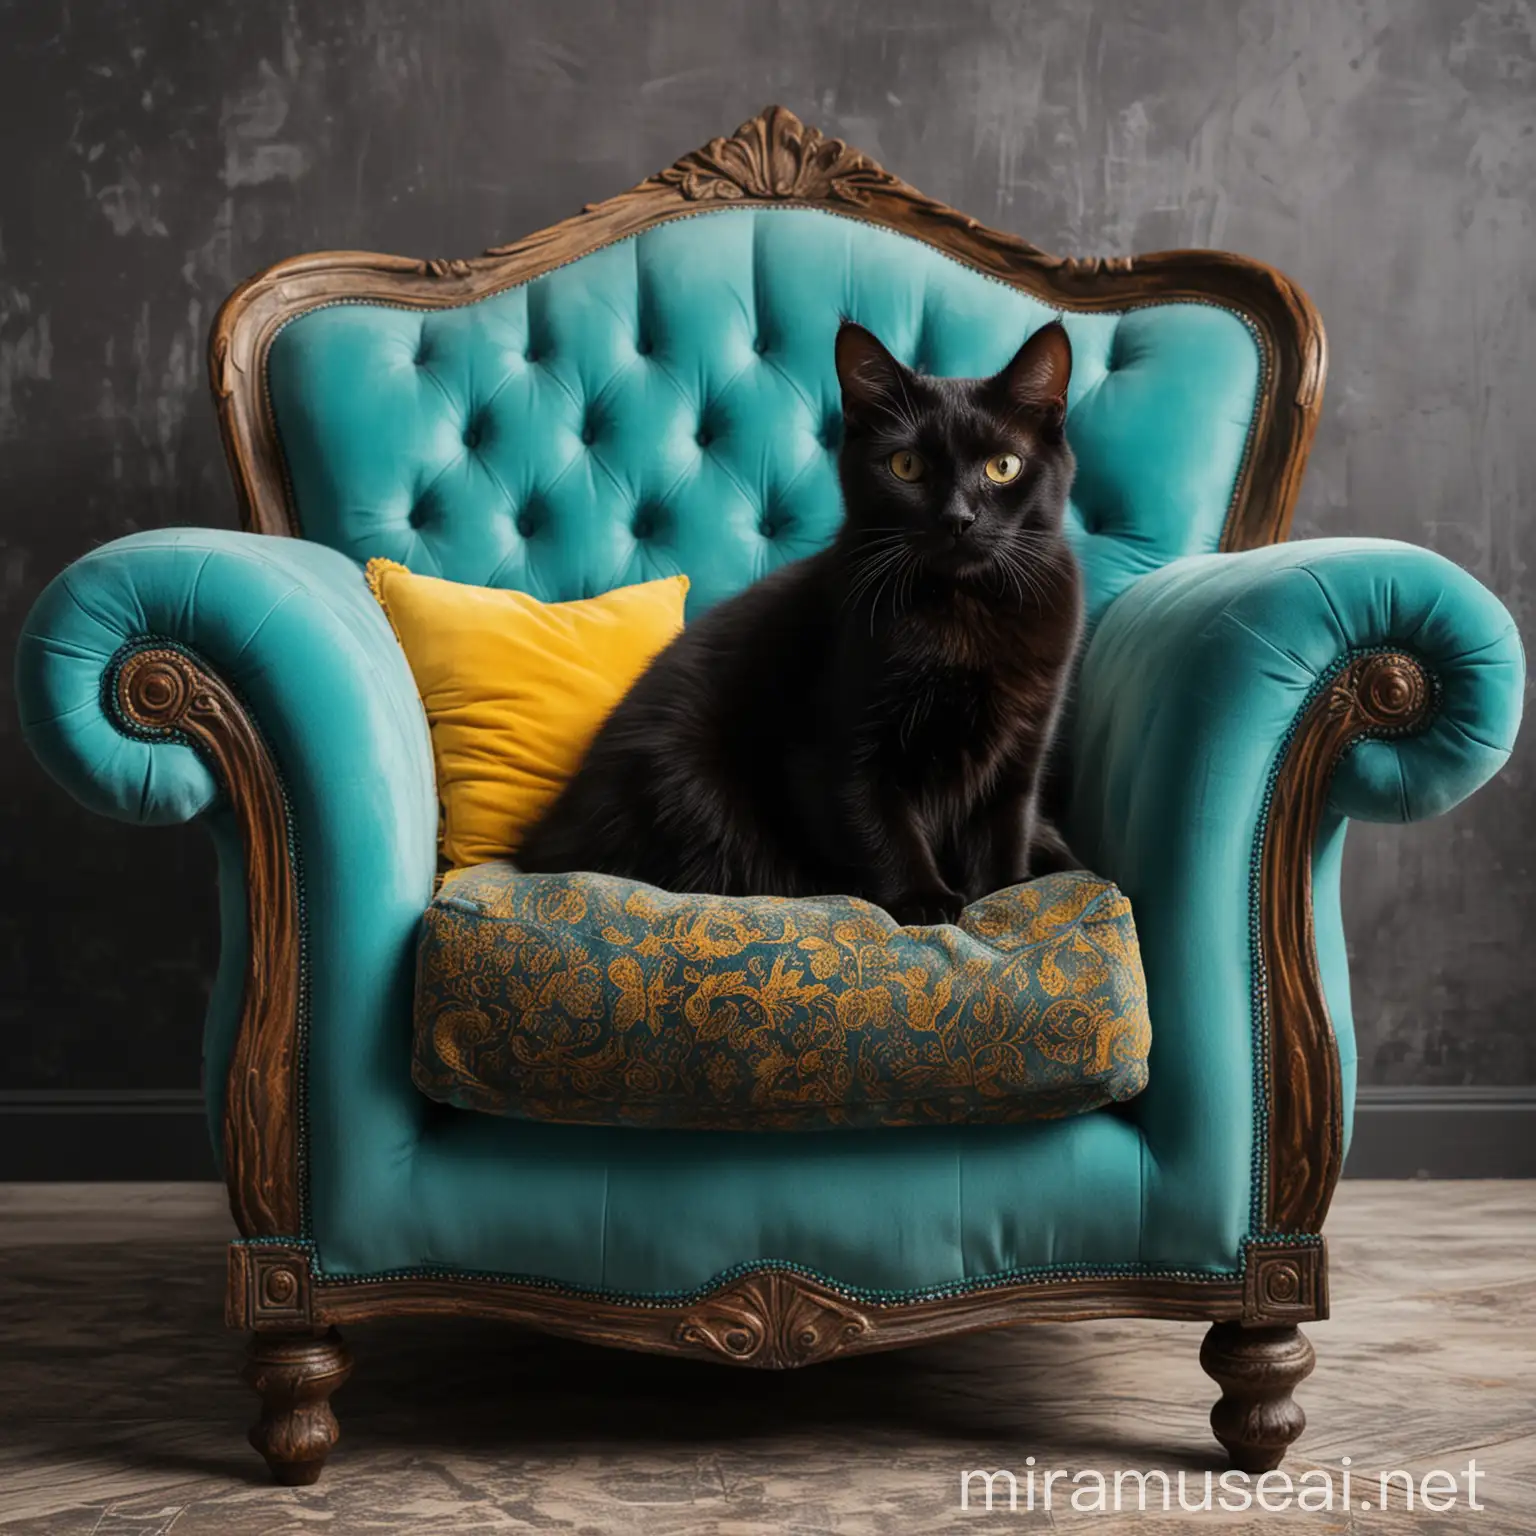 Black Cat Sitting in Luxurious Velvet Armchair in Turquoise and Yellow Colors